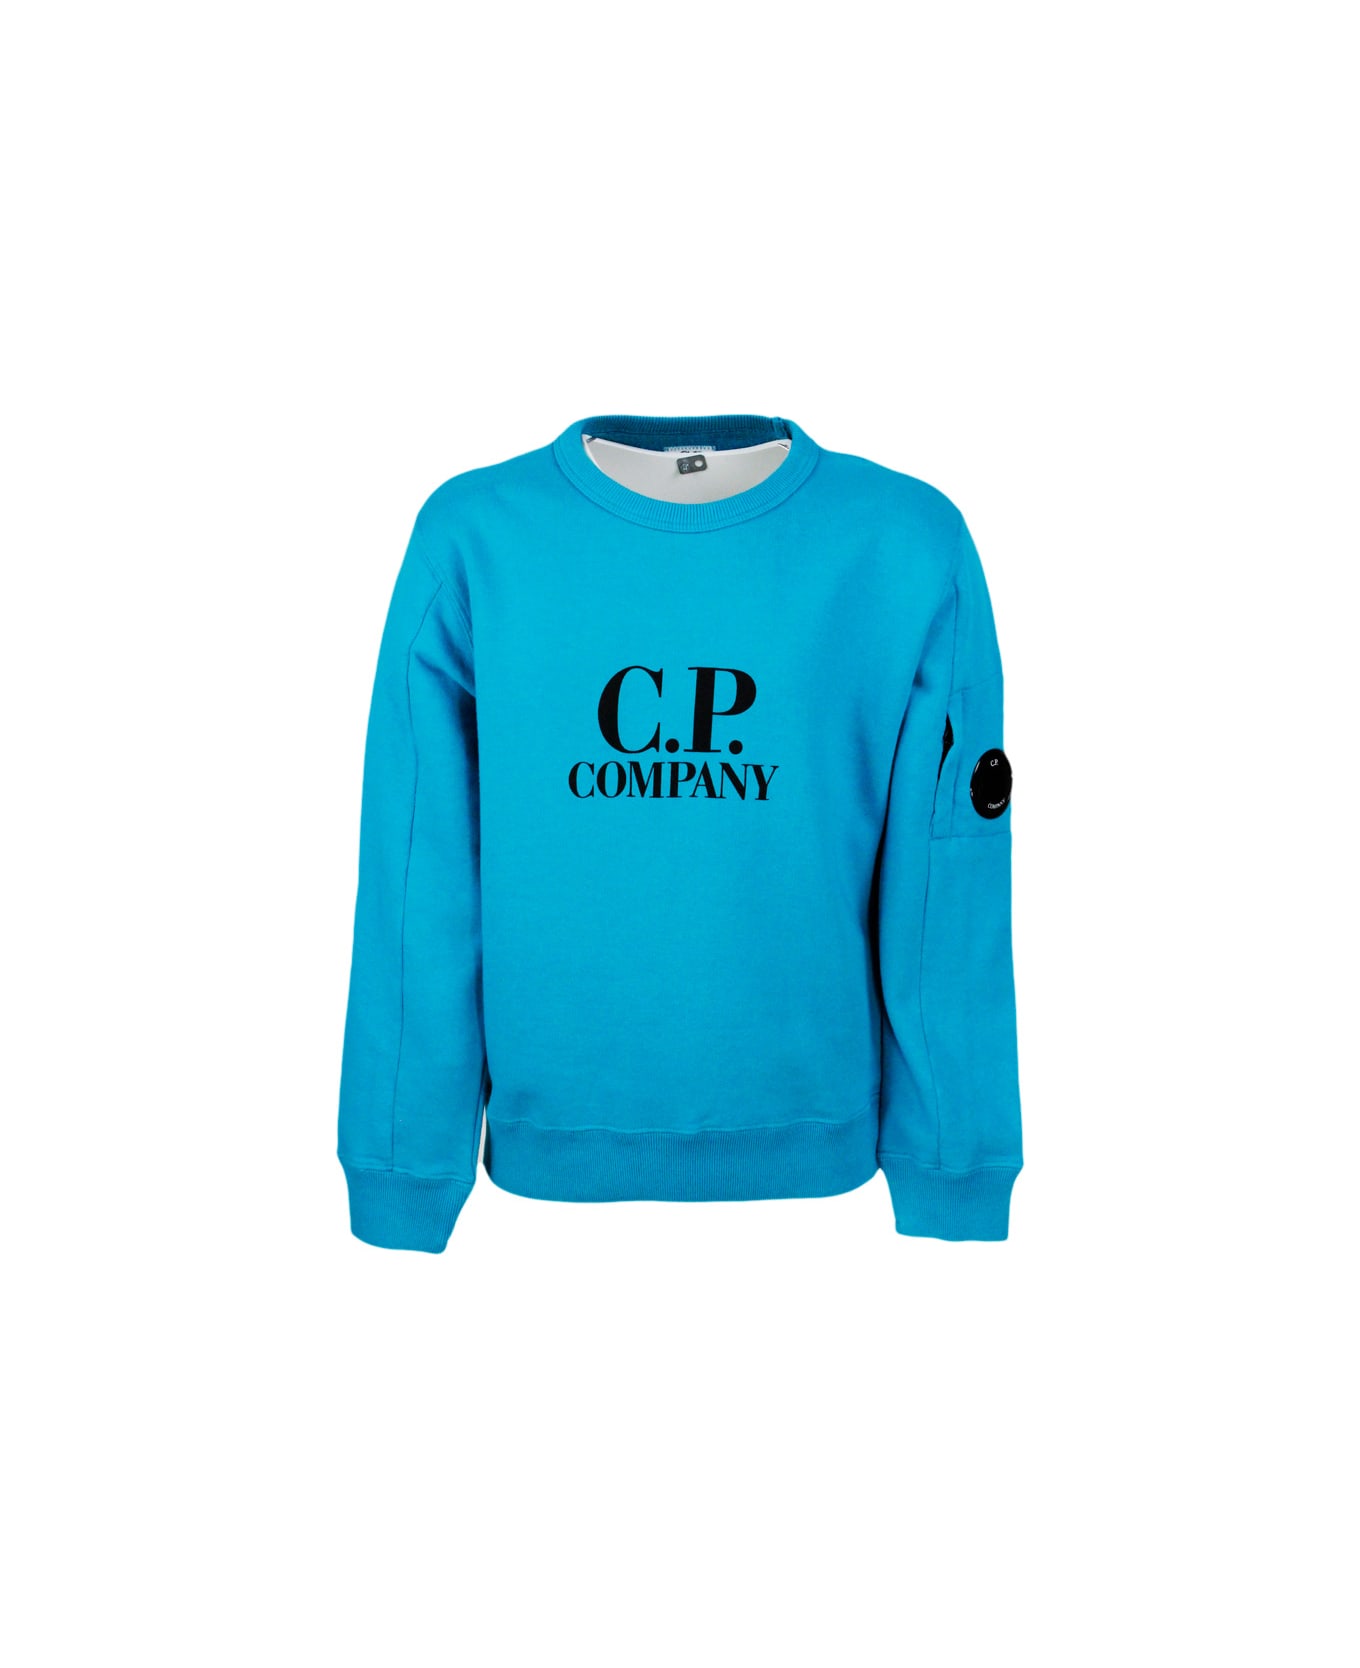 C.P. Company Long-sleeved Crewneck Sweatshirt In Breathable Cotton Fleece With Logo On The Chest And Eyeglass Lens On The Shoulder - Blu royal ニットウェア＆スウェットシャツ